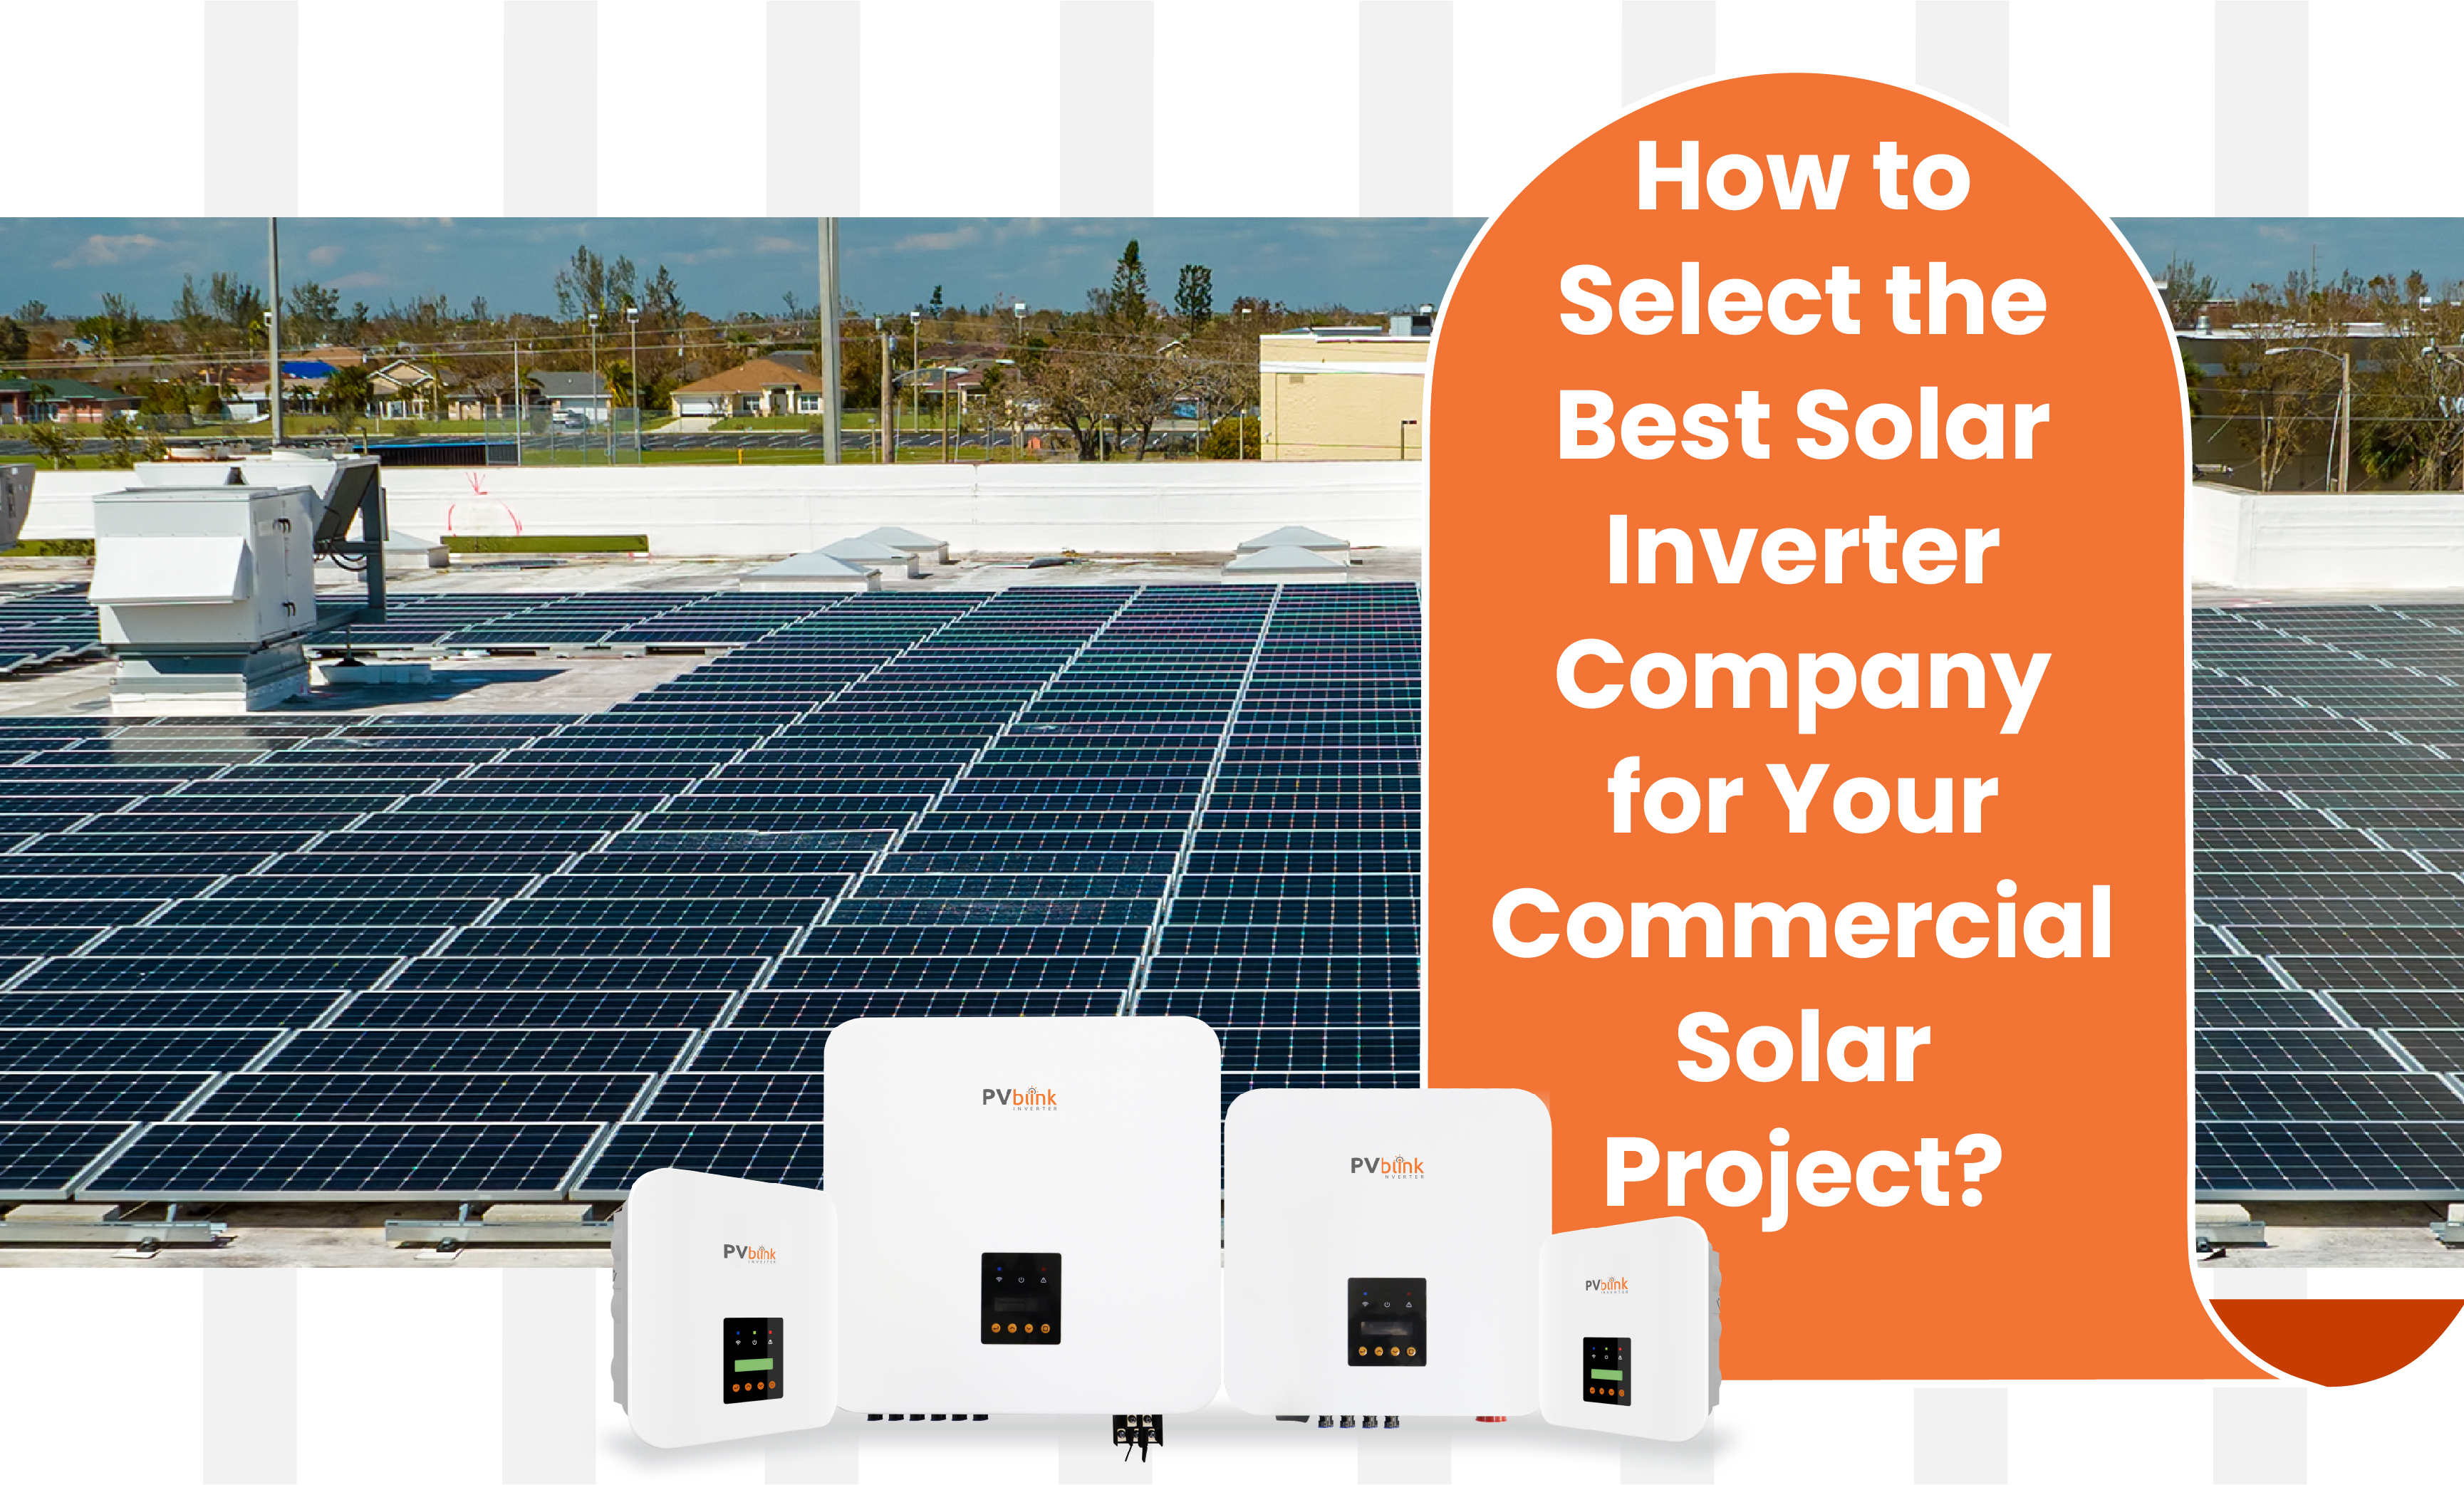 PVblink - Best Solar Inverter Company for Your Commercial Project